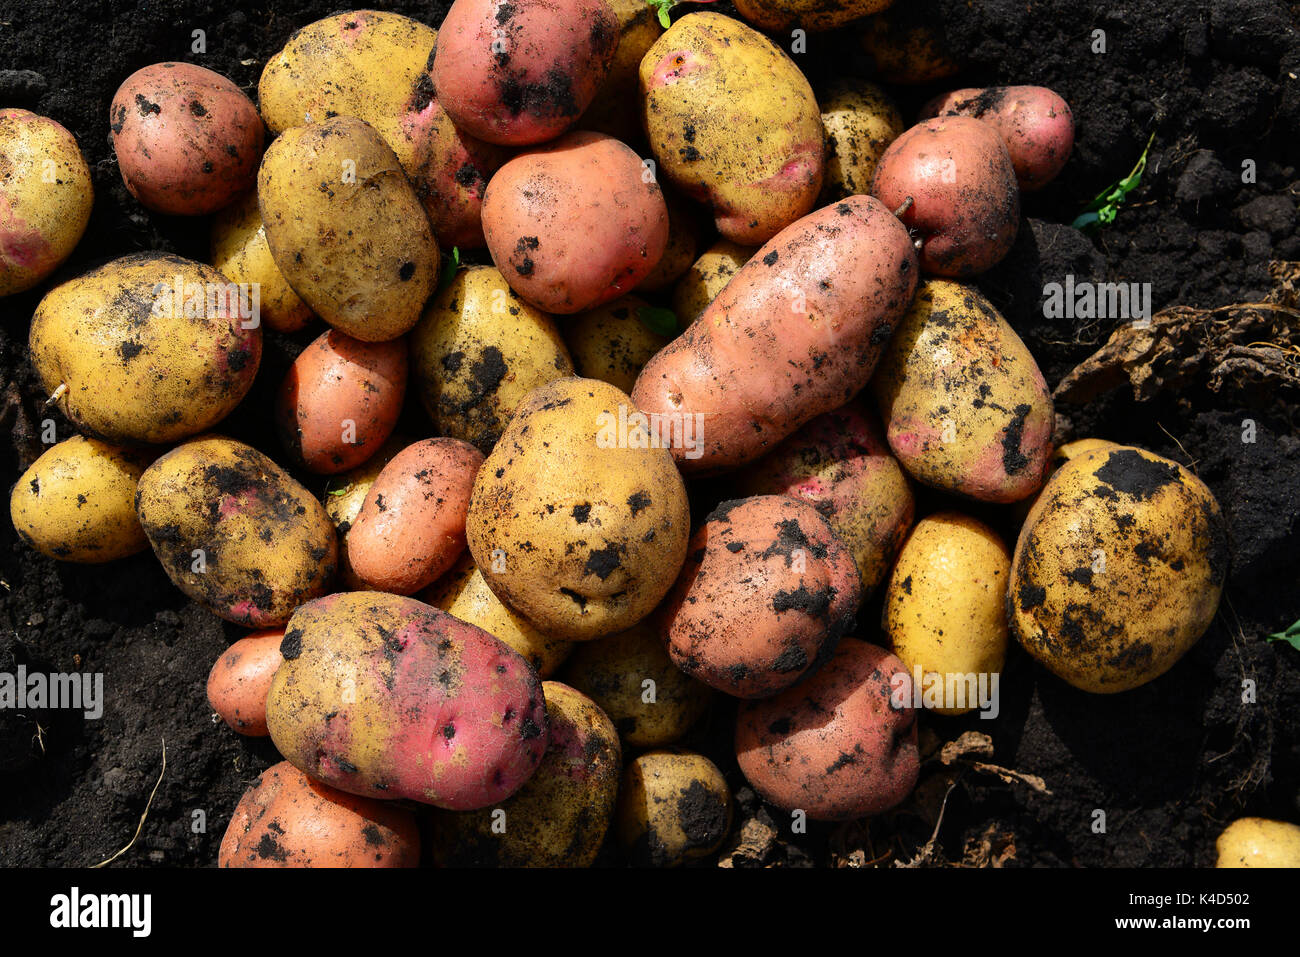 Potatoes of different varieties lie on ground Stock Photo